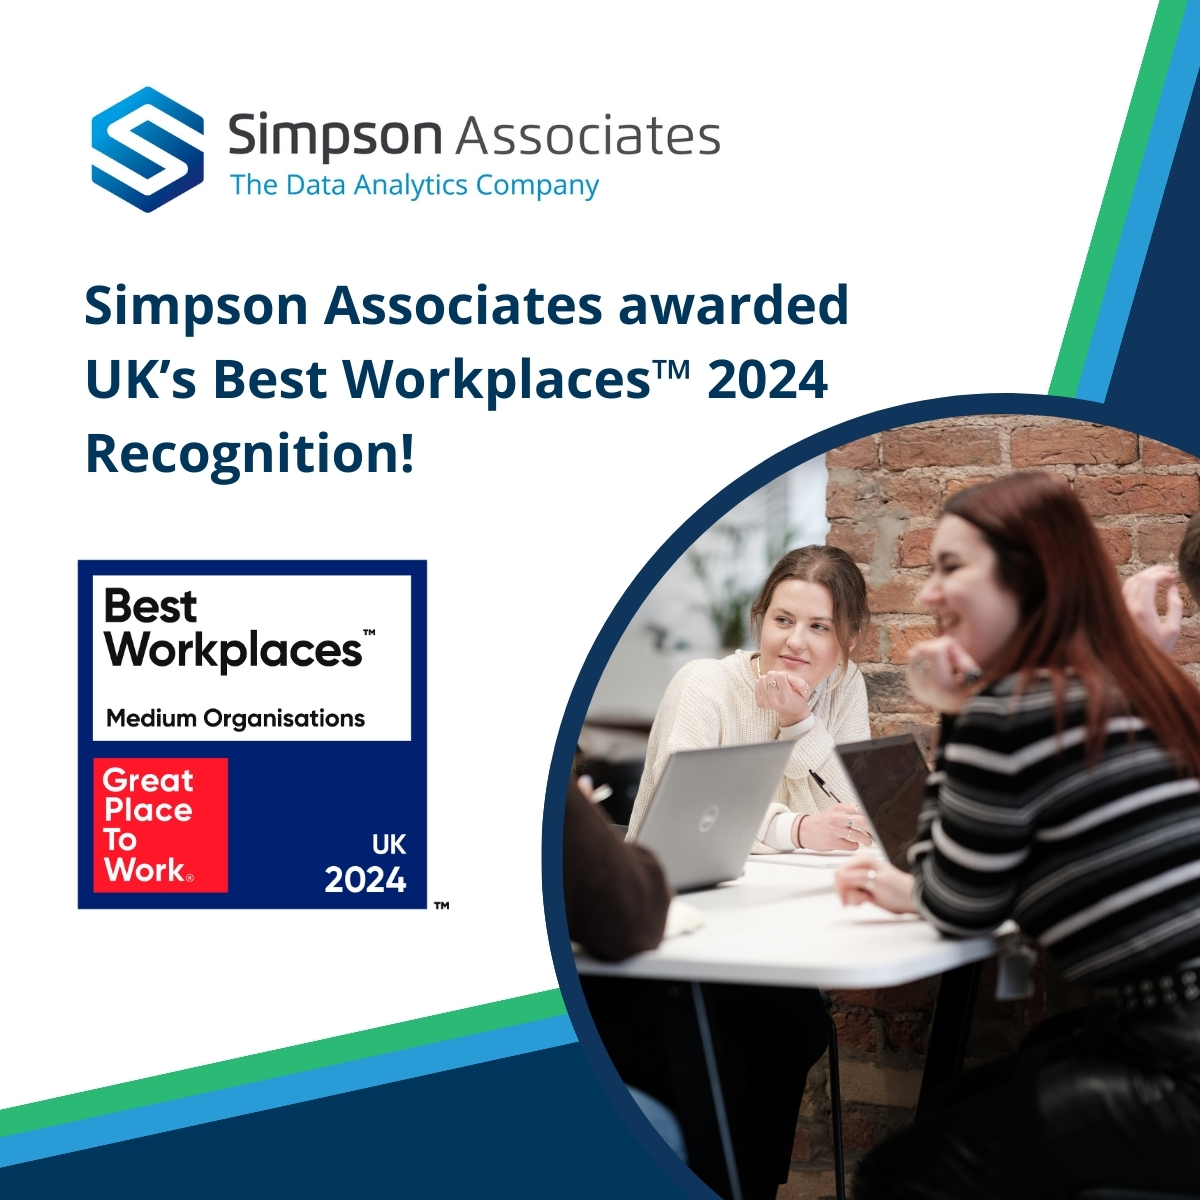 We've been recognized as a Best Workplace of 2024! 🏆 Our commitment to fostering an environment where our team can flourish is at the core of our organisation. Learn more here ➡️ eu1.hubs.ly/H08xYKt0 #GreatPlaceToWork #WorkplaceCulture #Bestworkplace🌱